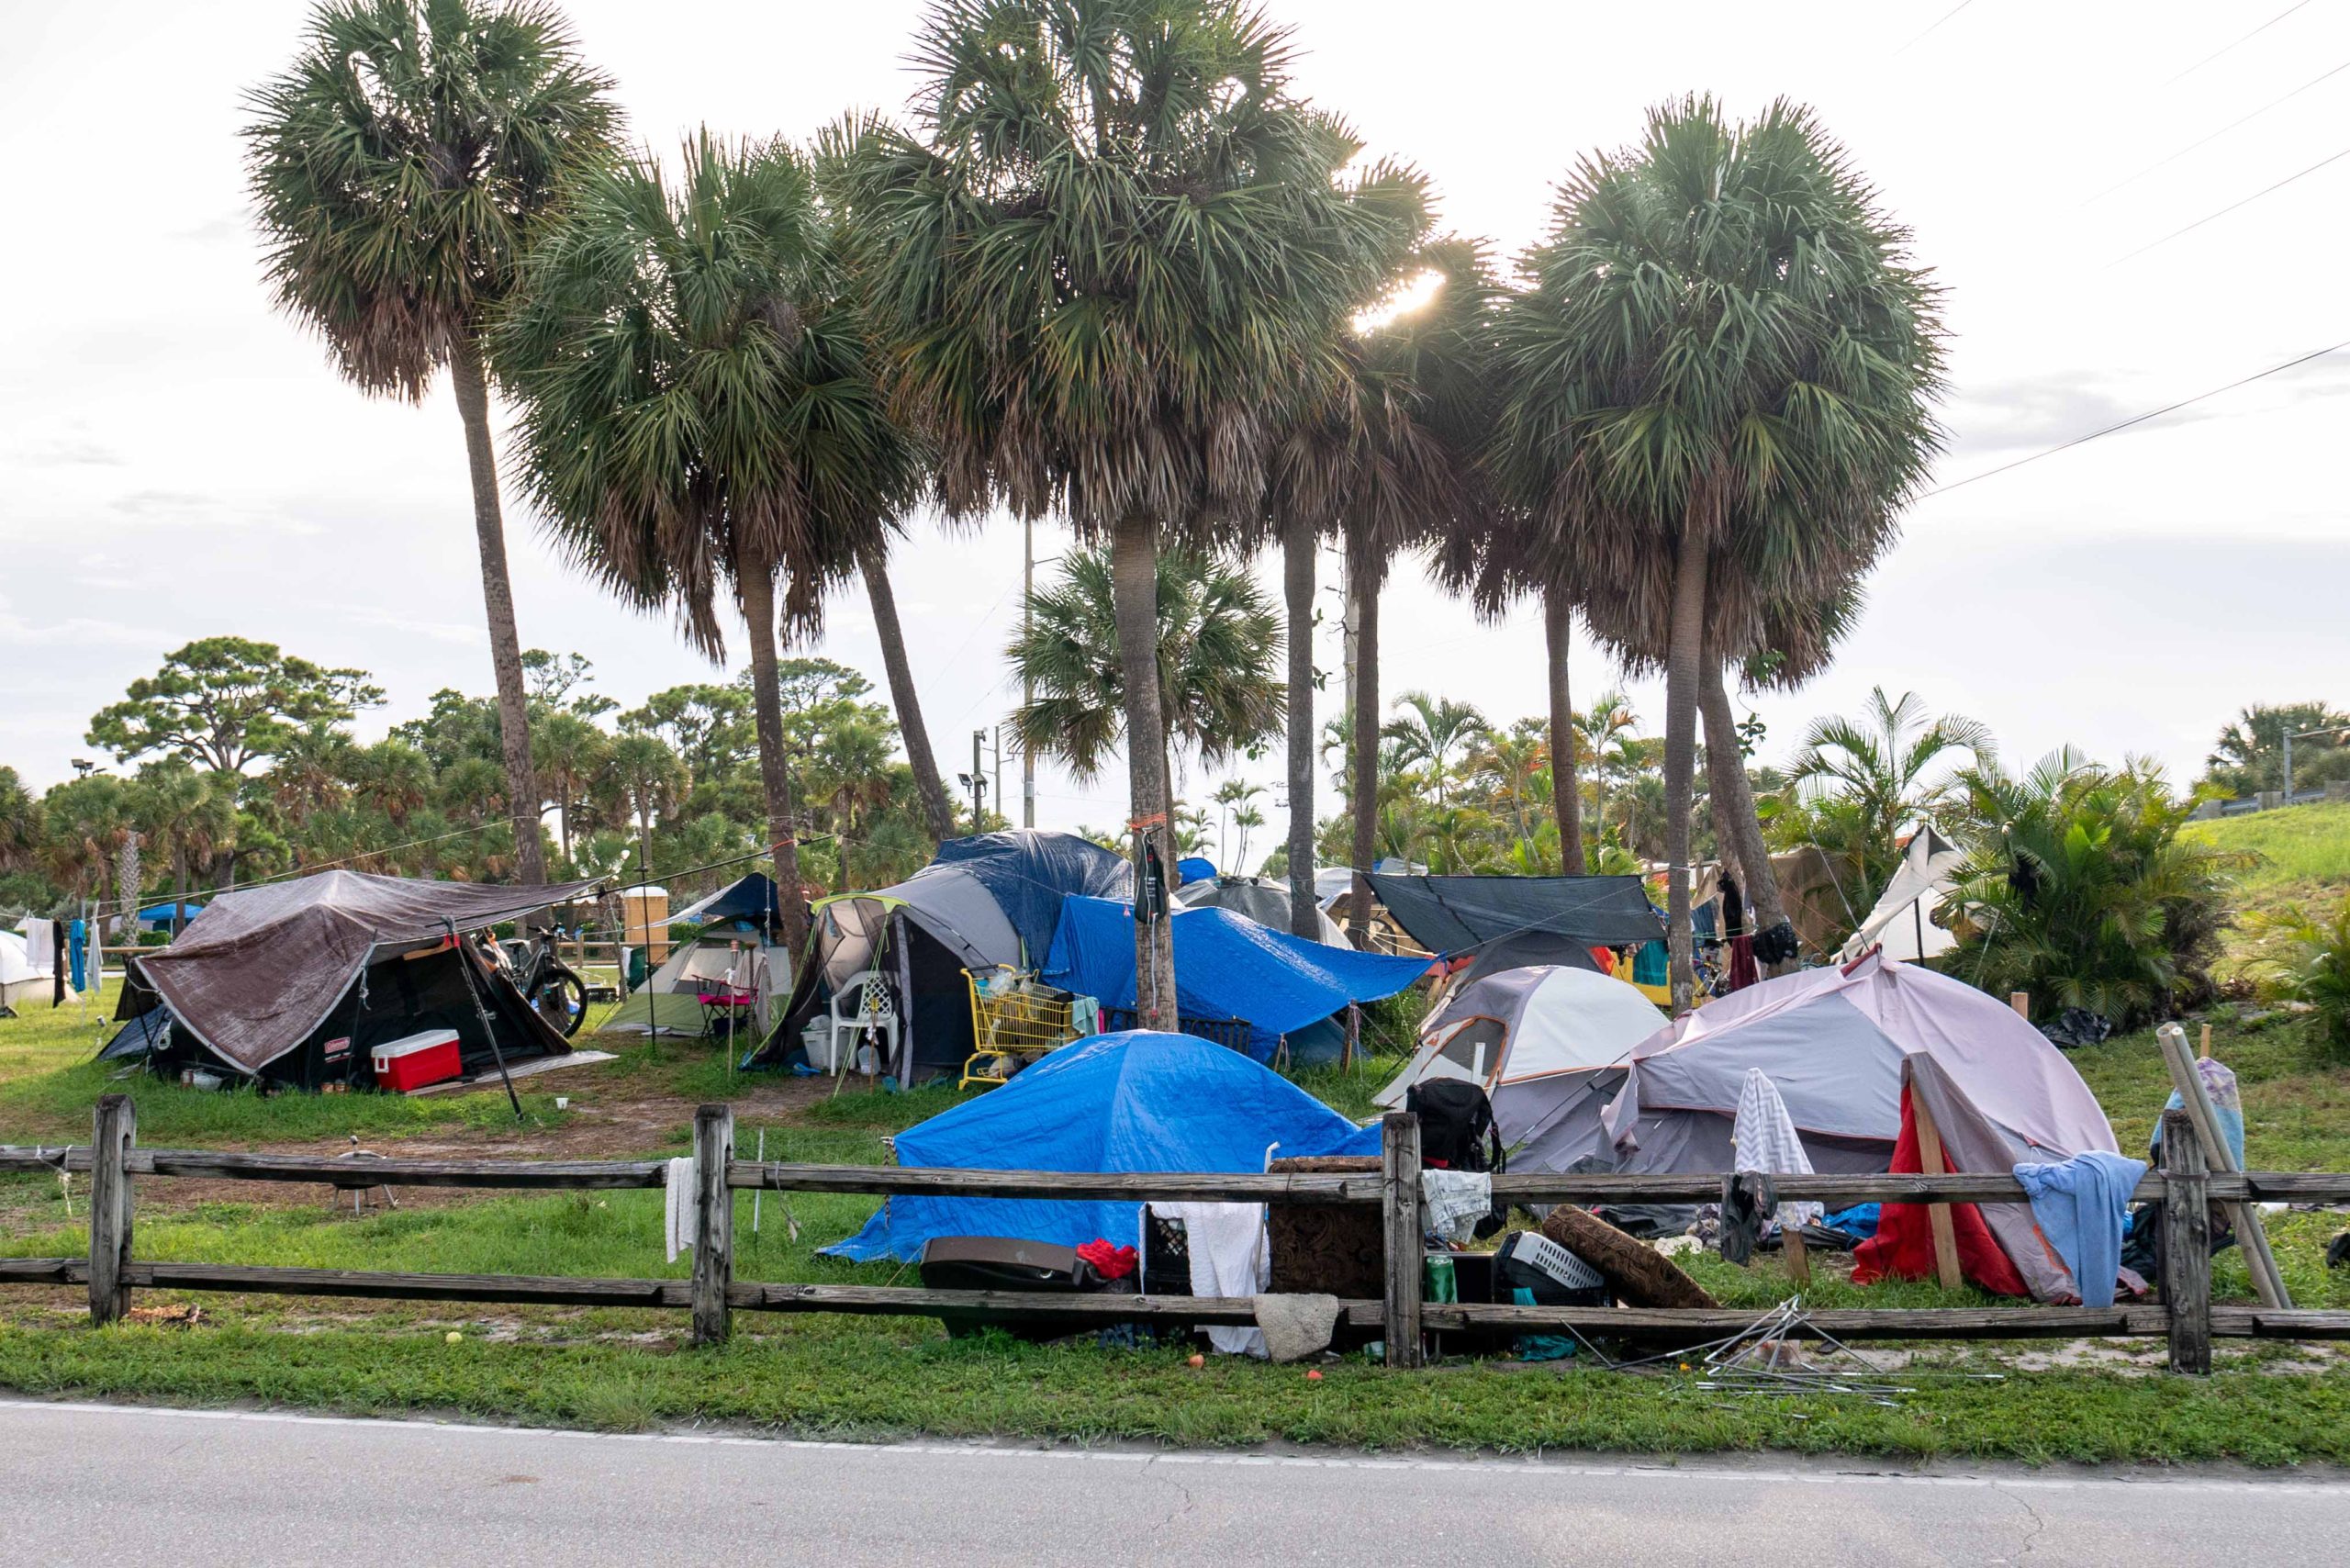 Summer Heat Brings Increase in Health Risks for Florida’s Homeless